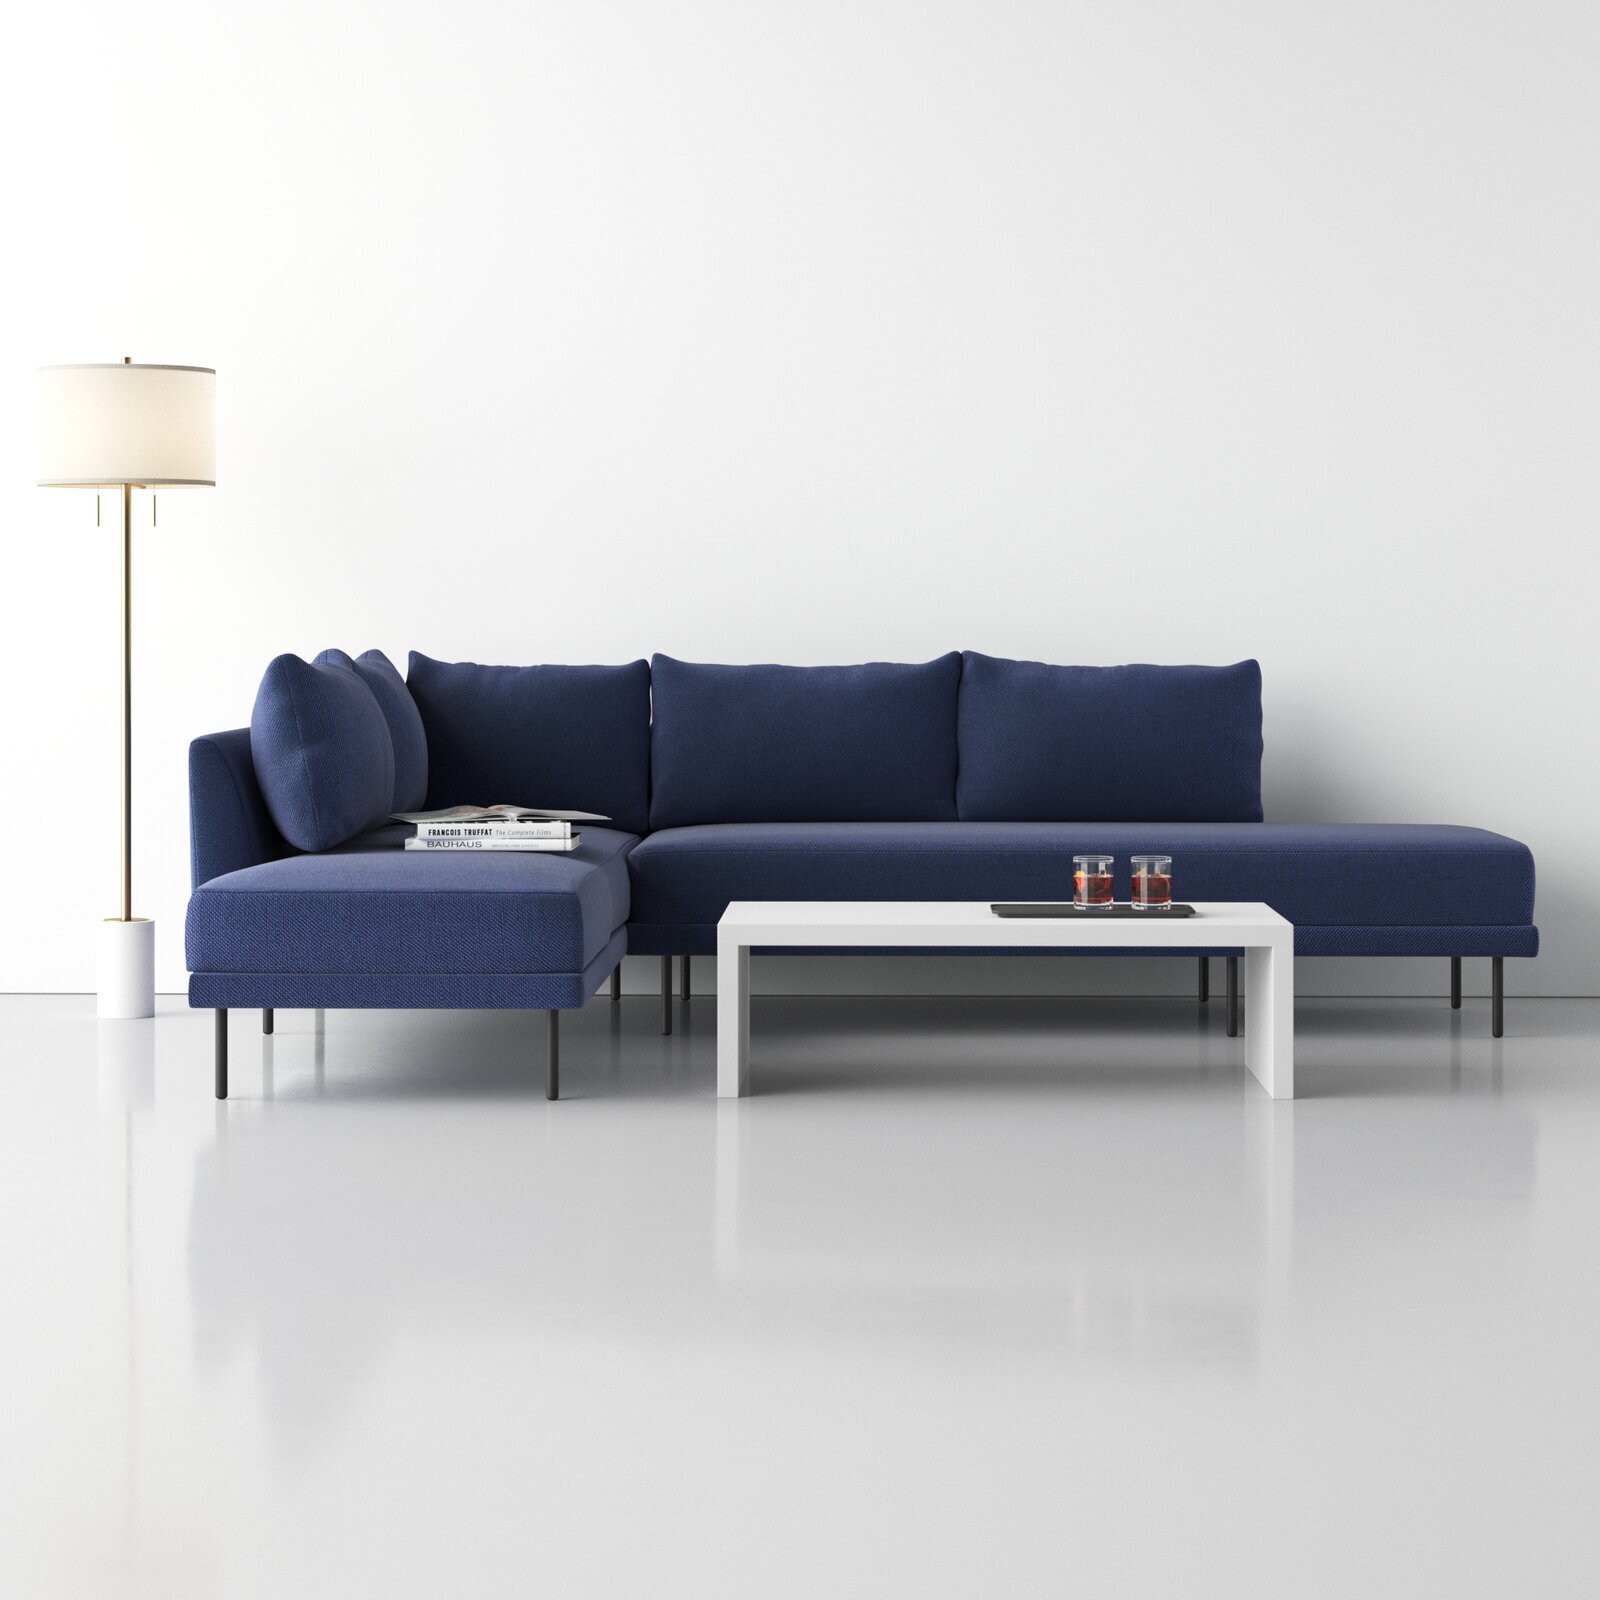 Reversible modern sleeper sectional and chaise 